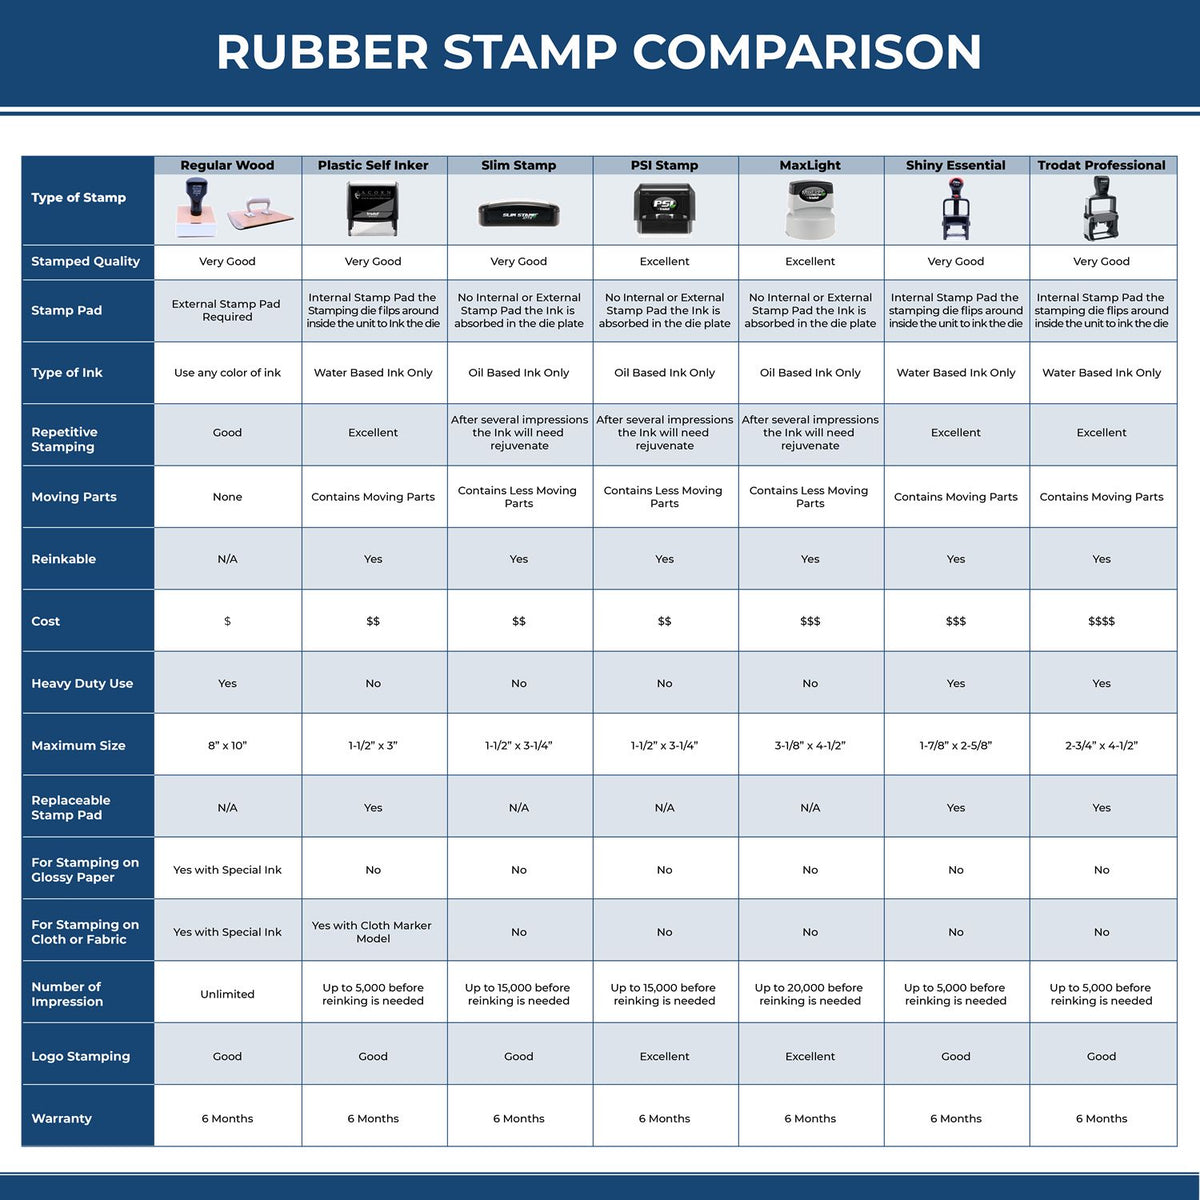 Jumbo Bold Red Received Xstamper Stamp 5107 Rubber Stamp Comparison